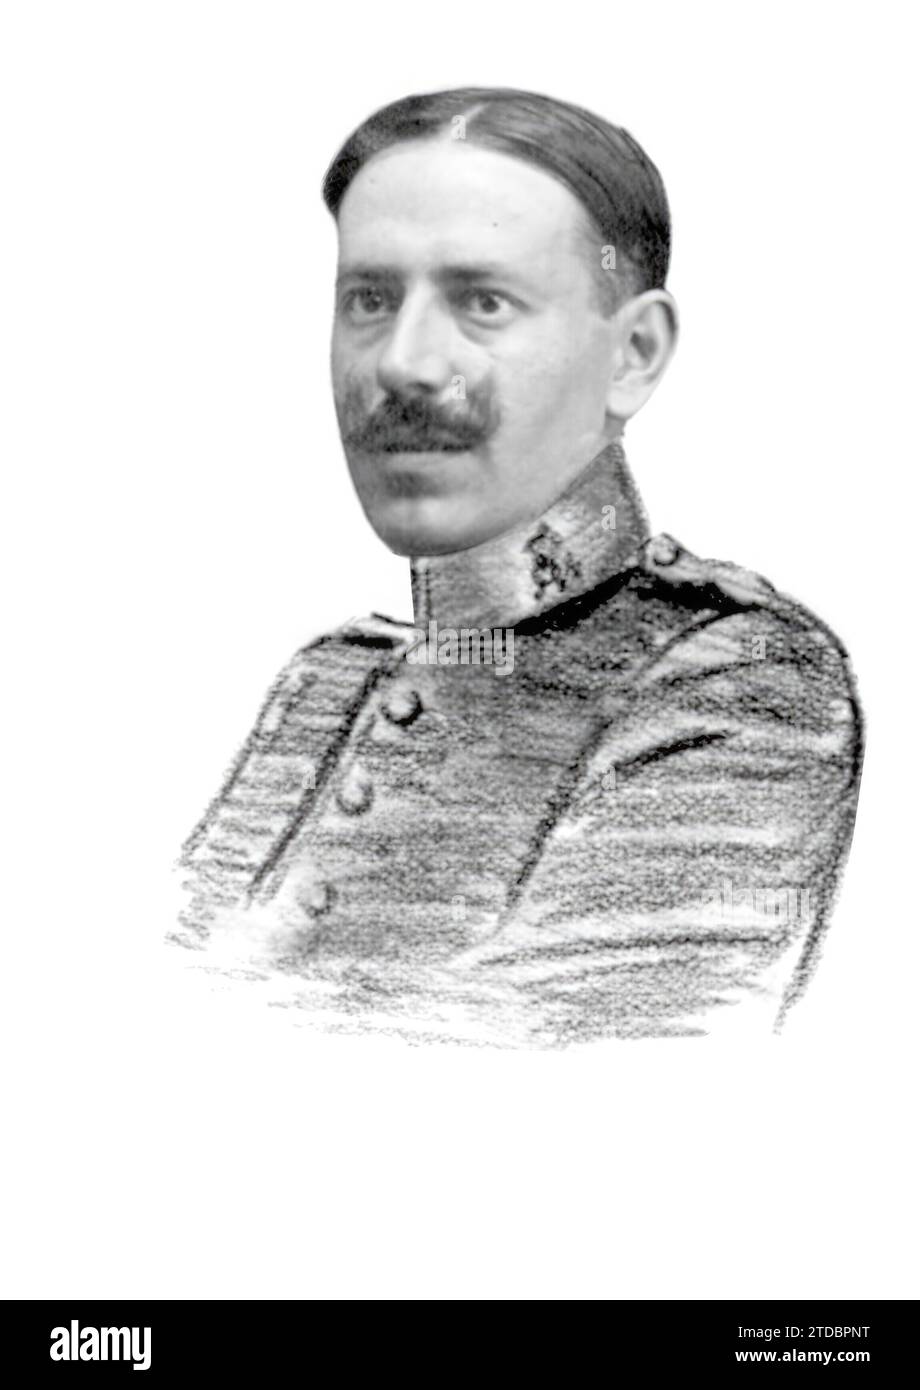 06/30/1916. Illustrious Literary. Mr. Adolfo Afonte Martínez, first lieutenant of the Isabel Ii infantry, who has won the 2000 Pesetas prize in the Dramatic Works contest organized by the Madrid city council. -approximate date. Credit: Album / Archivo ABC / Santos Peña Stock Photo